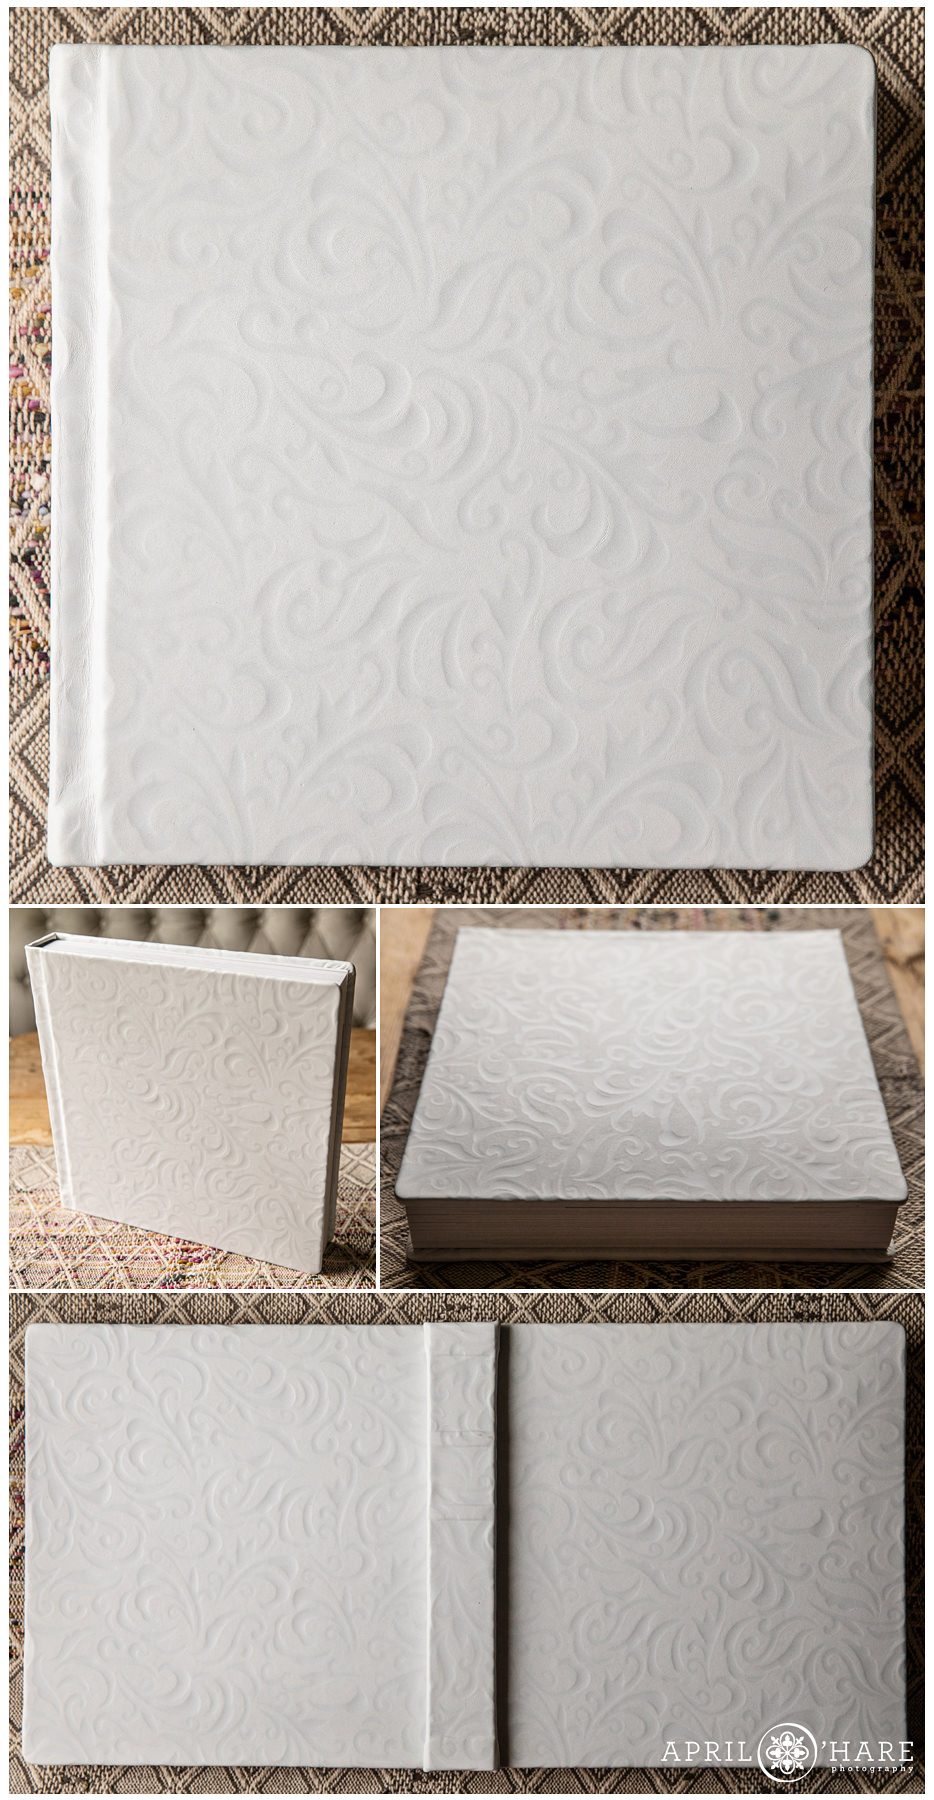 White Stamped Leather Album with Swirl Design from Finao called Chyna 12x12" Wedding Album